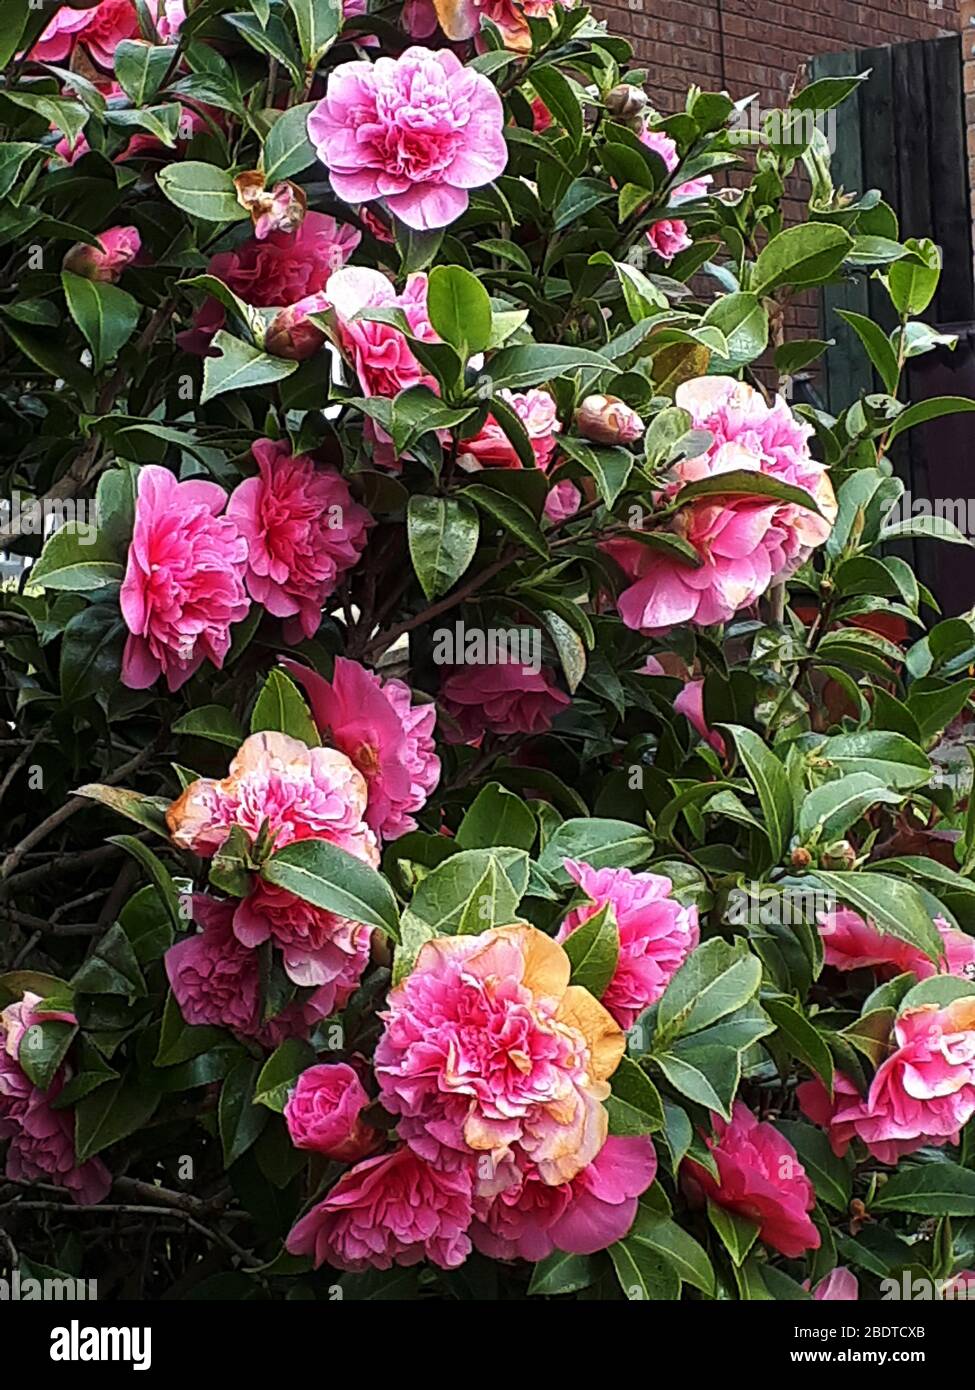 One Of The Early Showy Flowers Of Spring In Burnley Northern England Is The Camellia Japonica Or Japanese Rose It Is The State Flower Of Alabama Usa Stock Photo Alamy